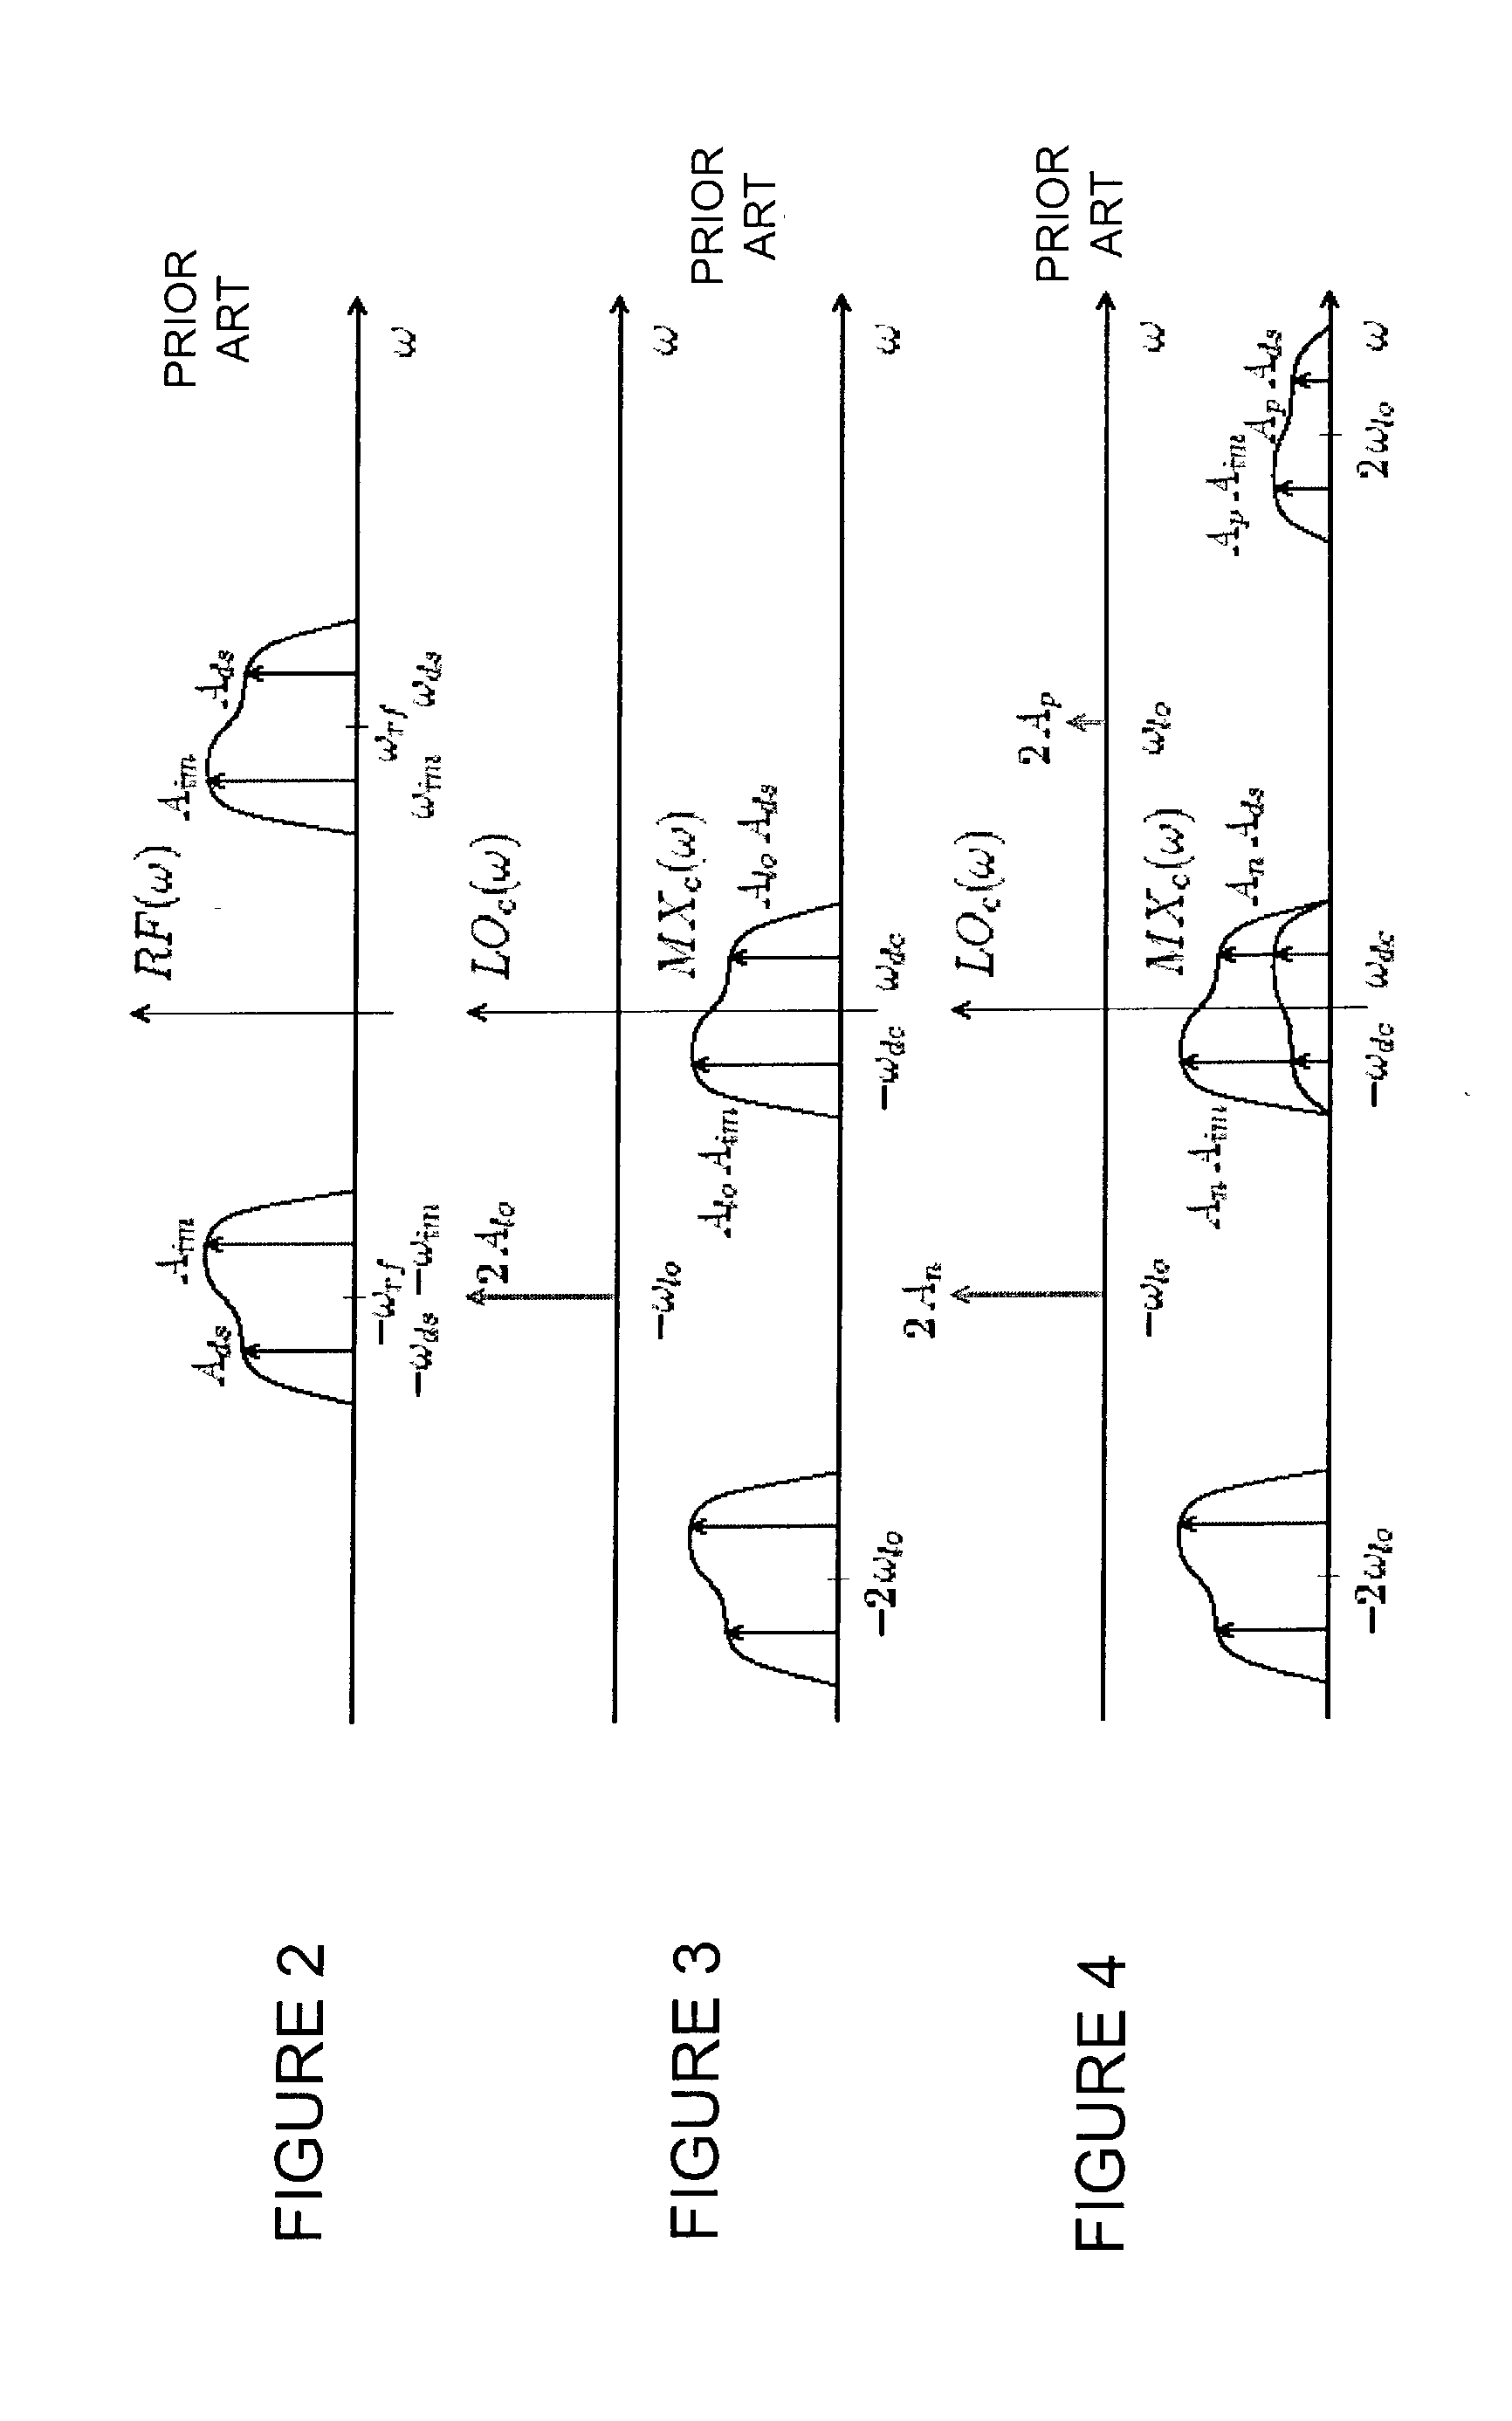 Polyphase filter with low-pass response